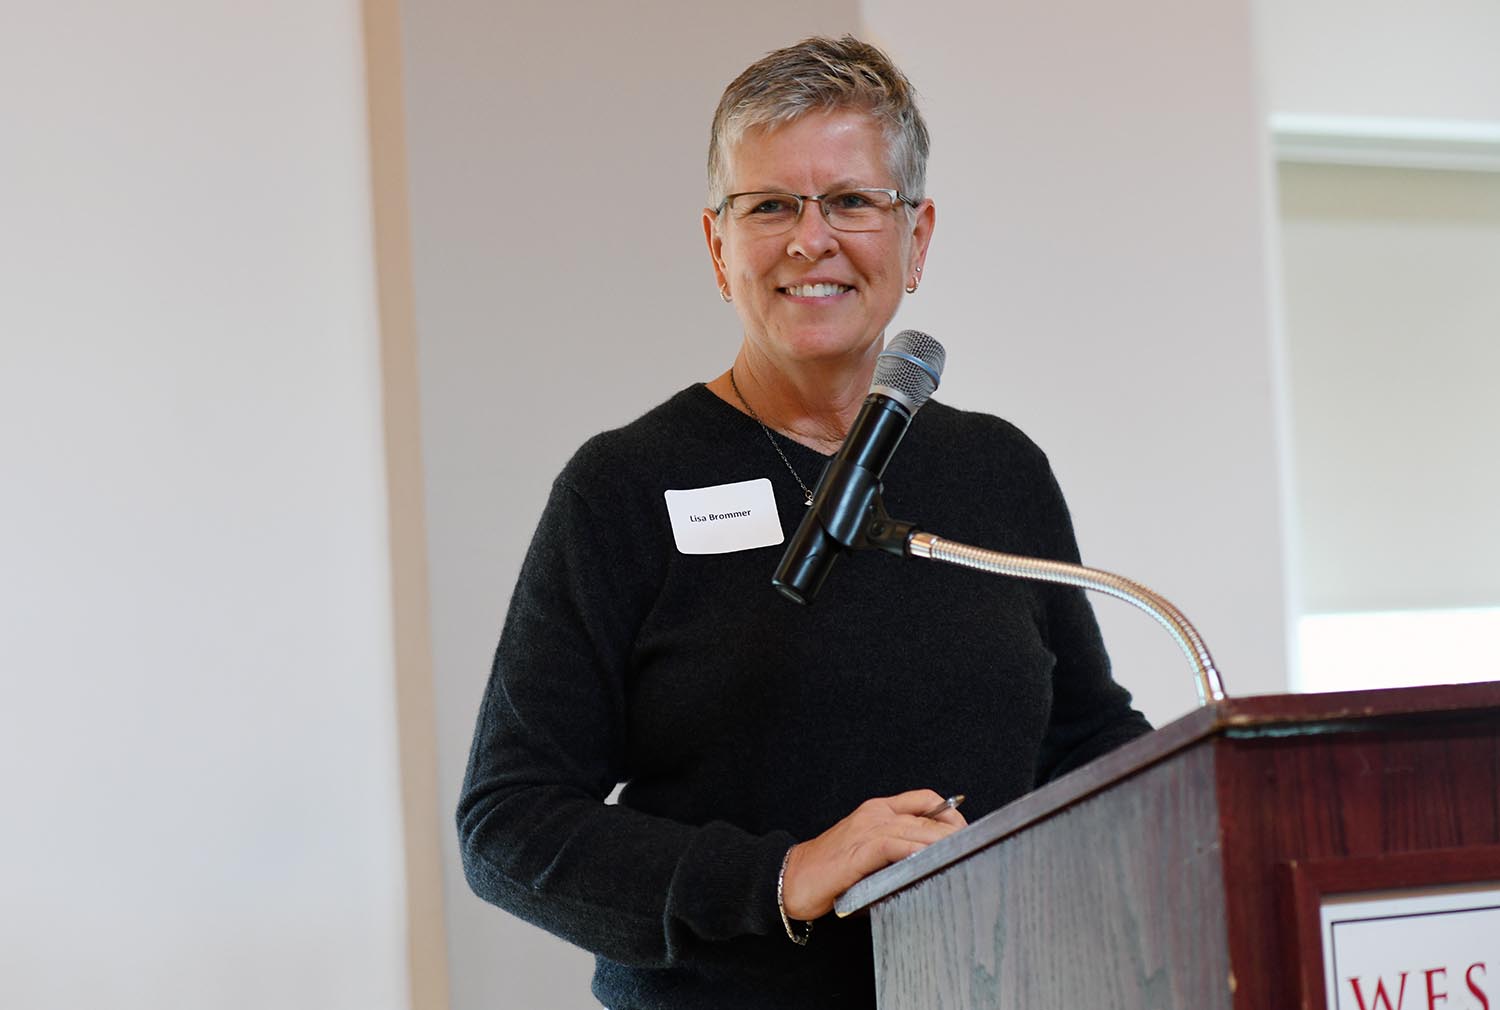 Lisa Brommer, associate vice president for the Office of Human Resources, welcomed the employees and their guests to the event. 